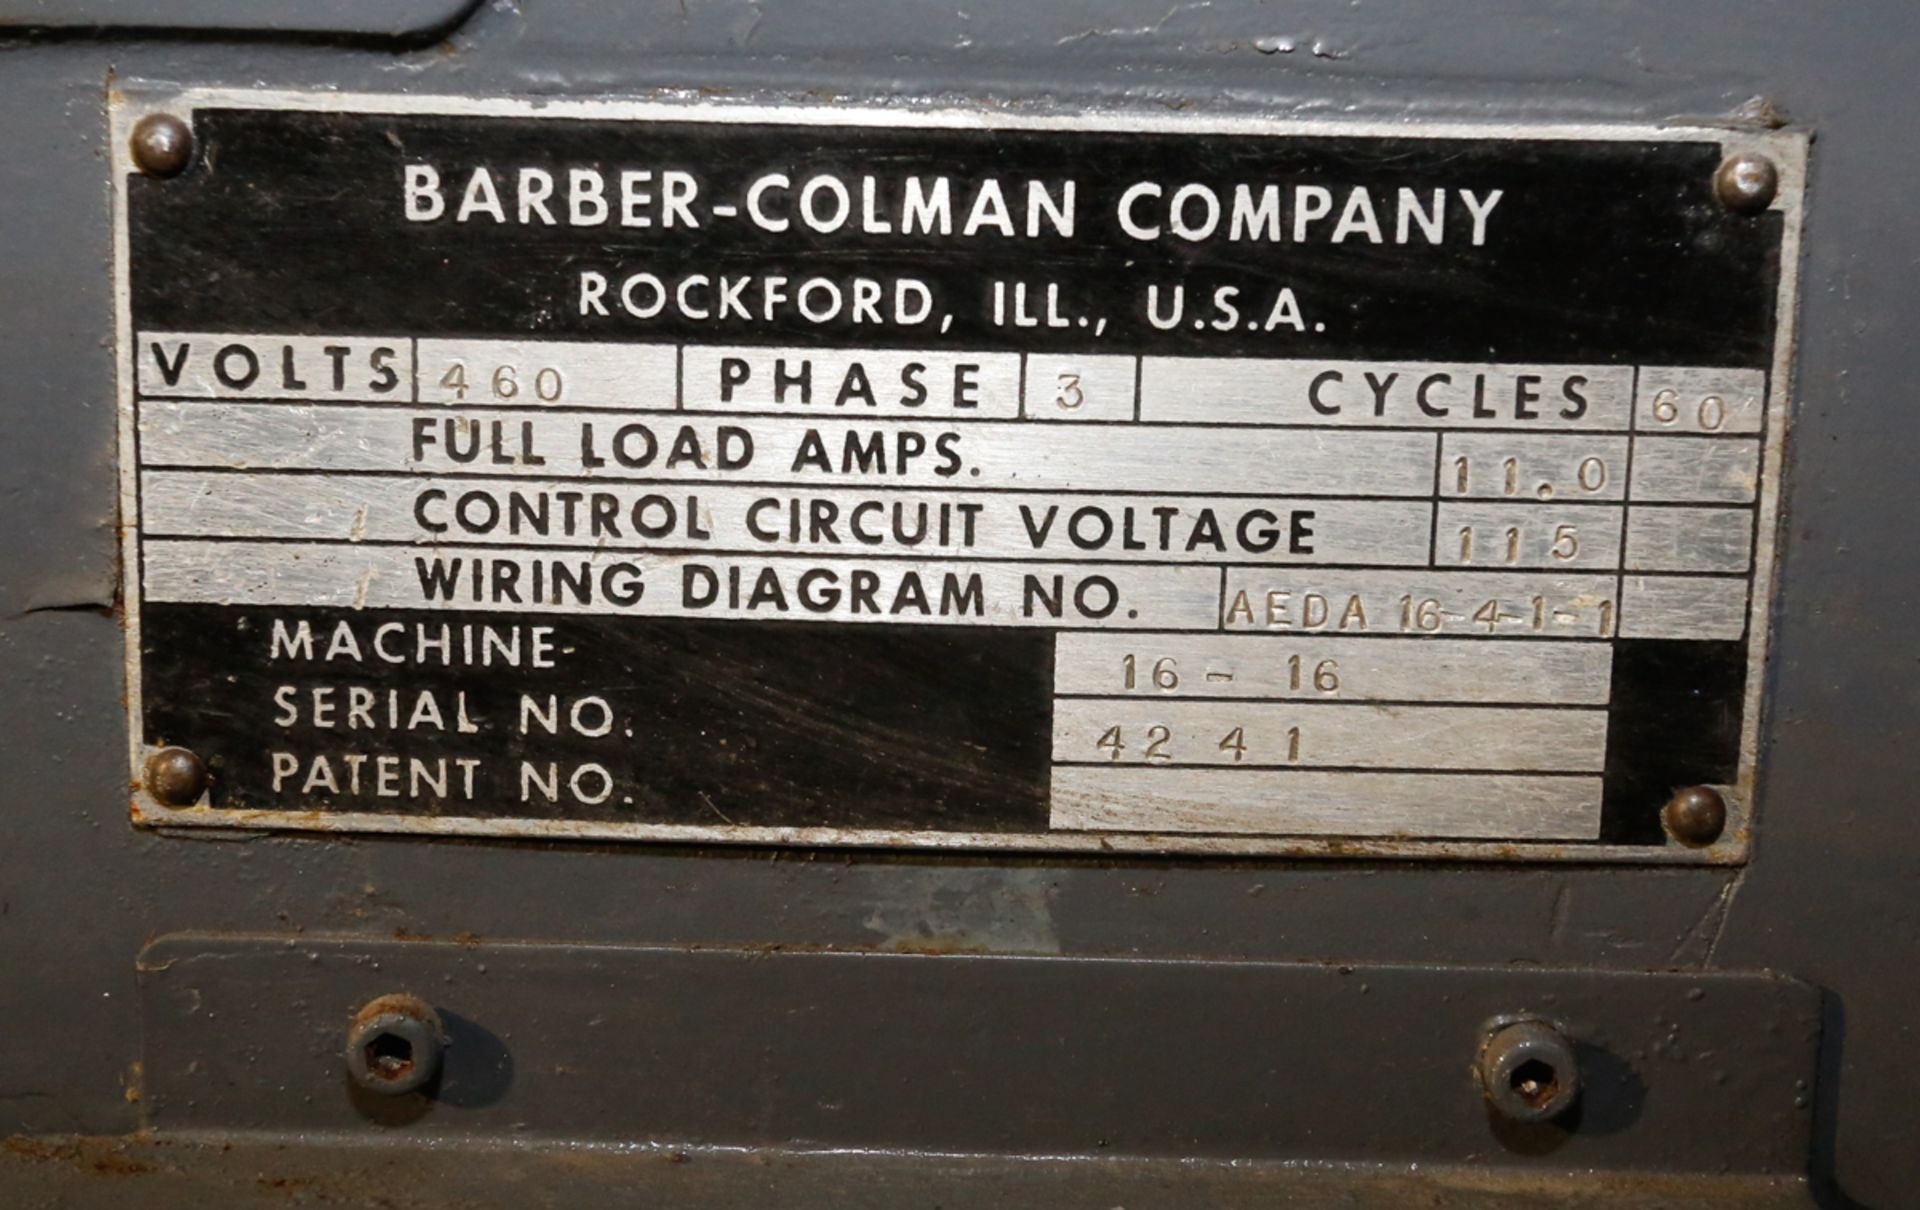 BARBER COLEMAN "16-16" GEAR HOBBER, S/N: 4241 (LOCATED IN RICHMOND, QC) - Image 5 of 6